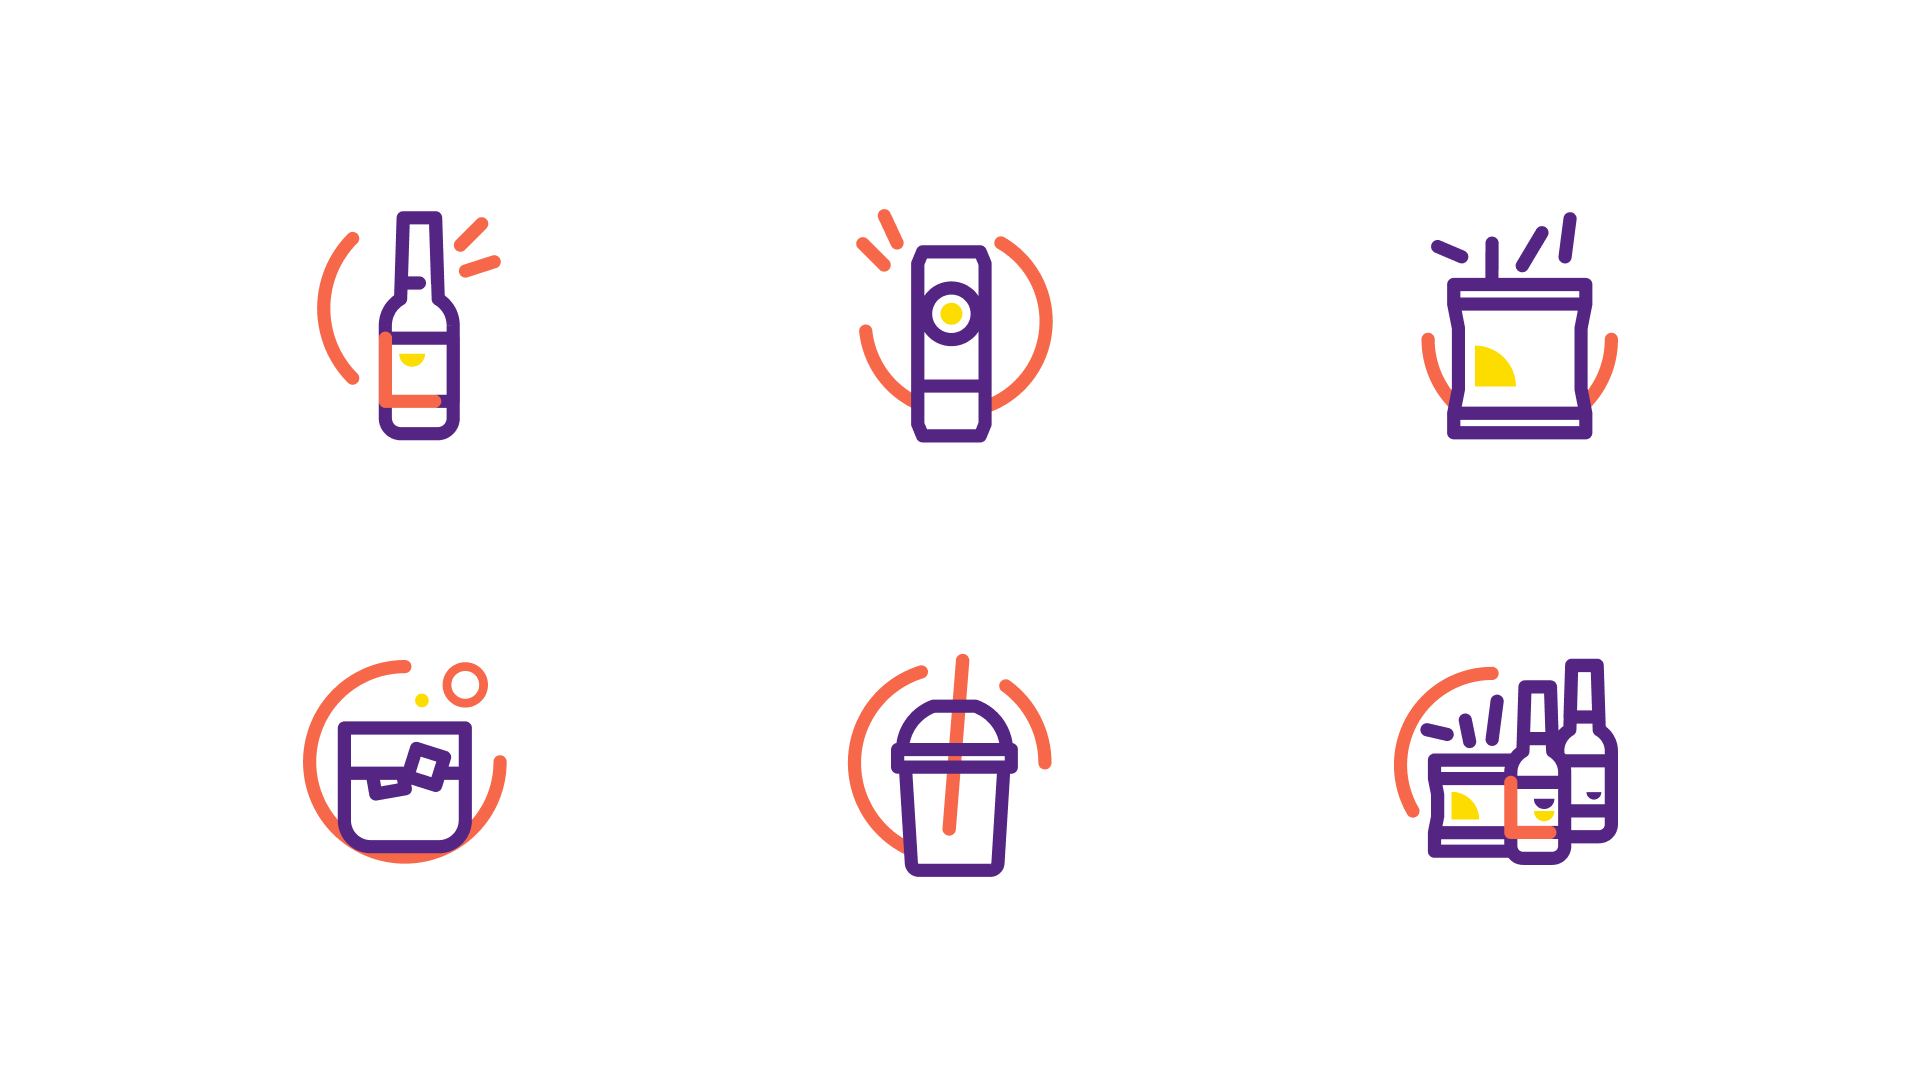 glup-delivery-app-branding-case-study-icons-outlined-version